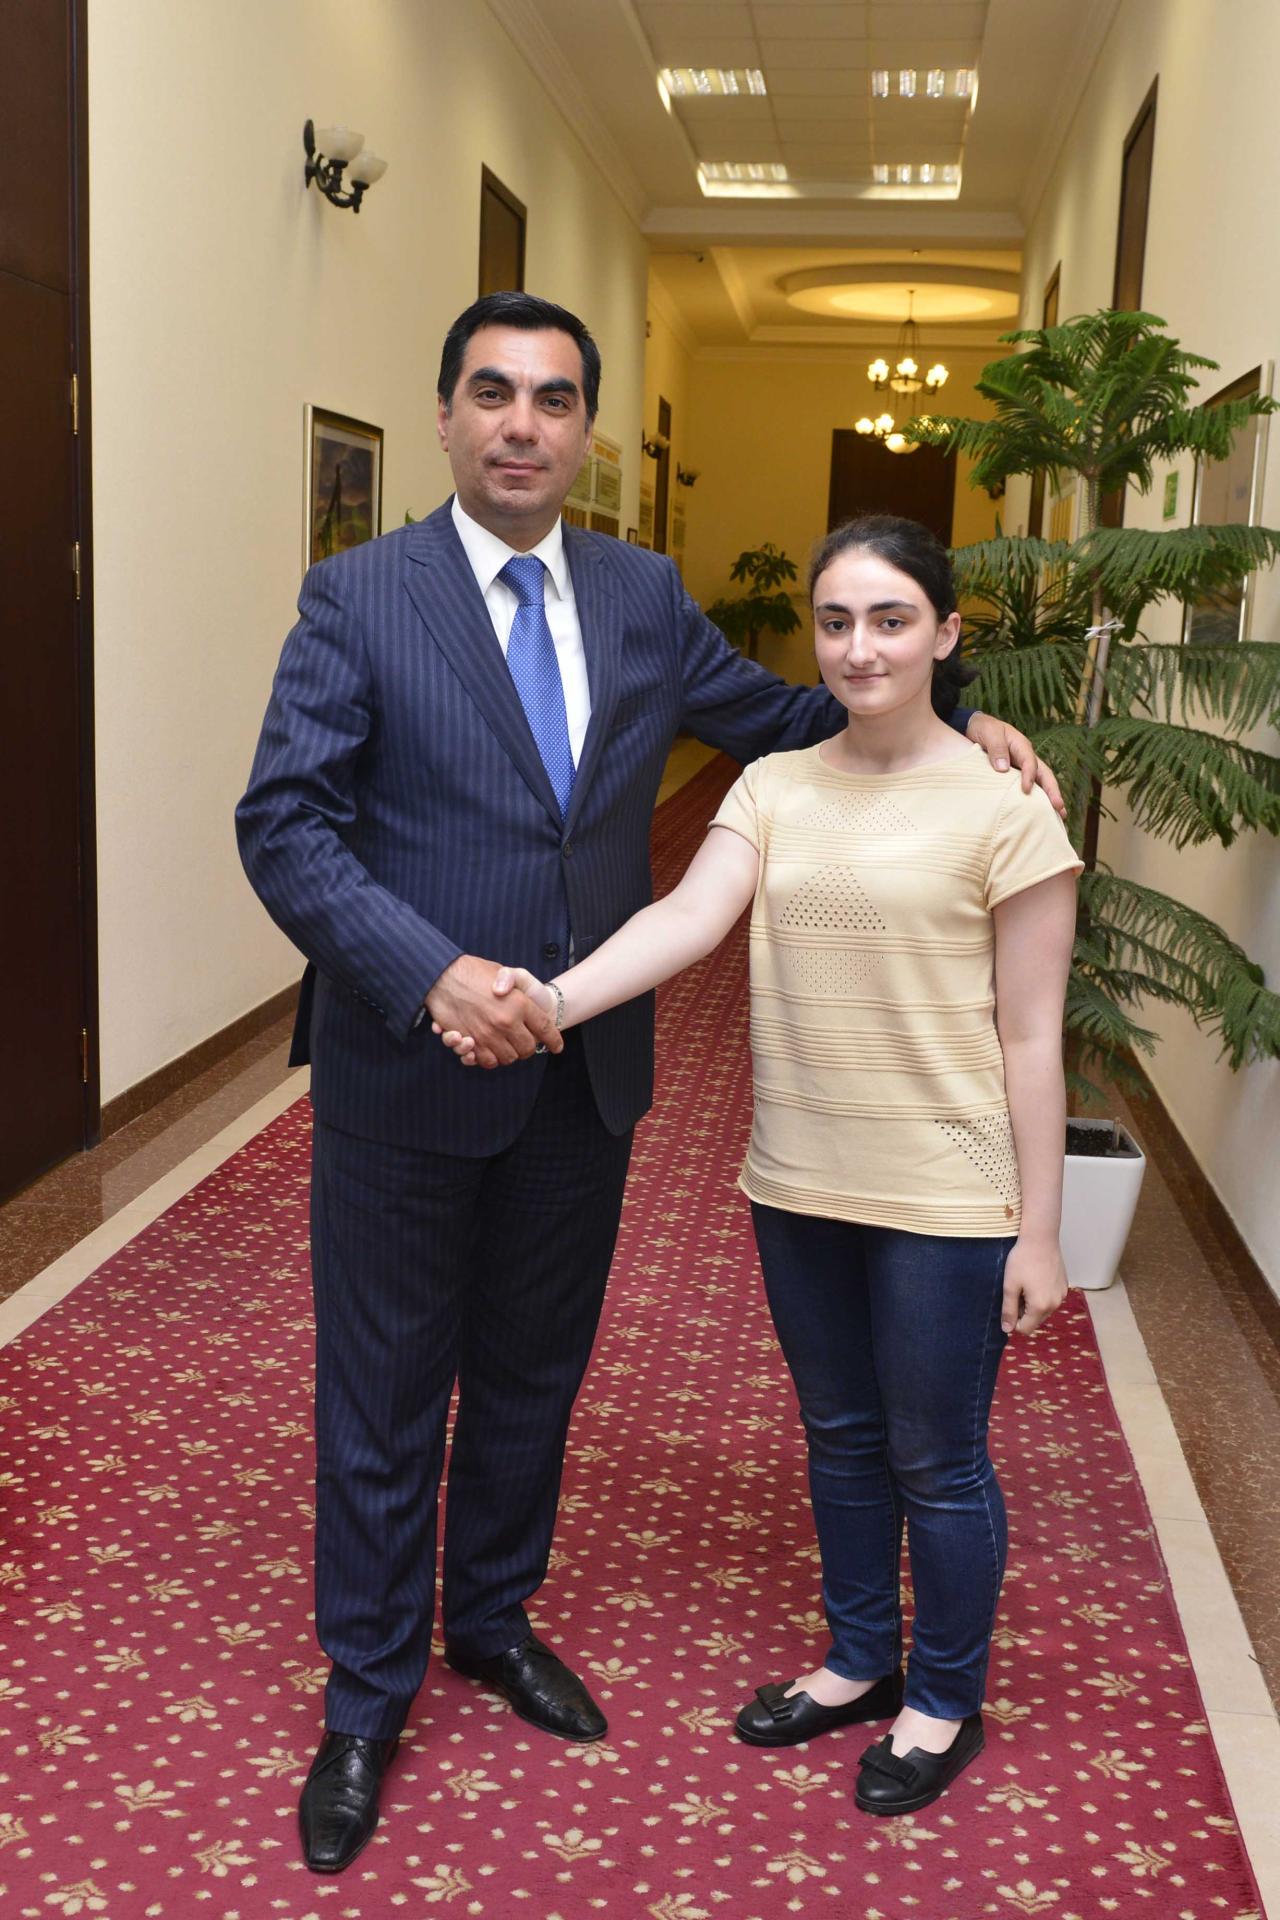 “Baku Higher Oil School has everything I want for my higher education,” says prospective student earning 700 points (PHOTO)